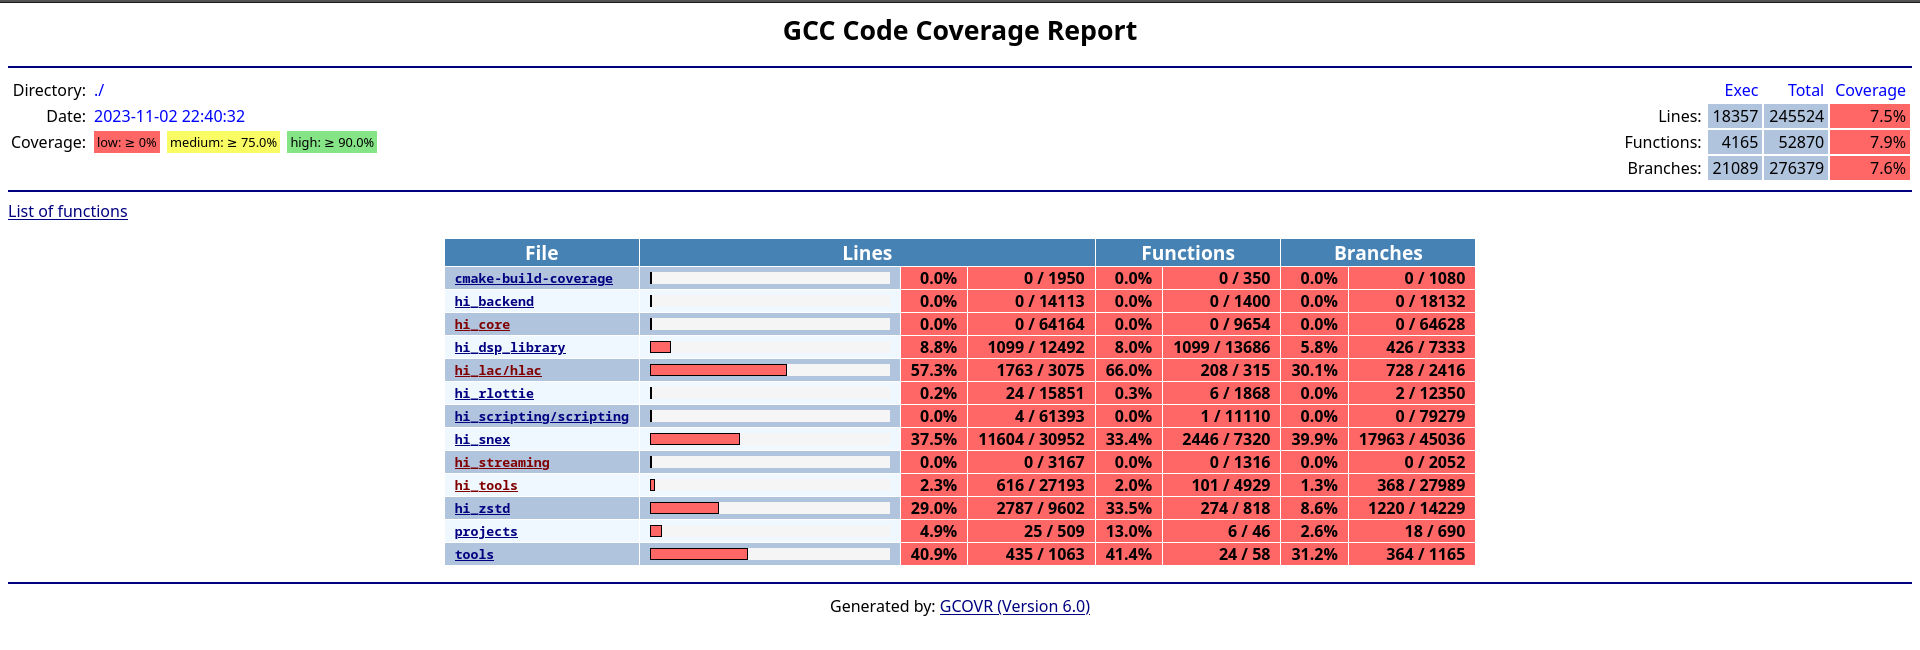 HISE_Code_Coverage.png